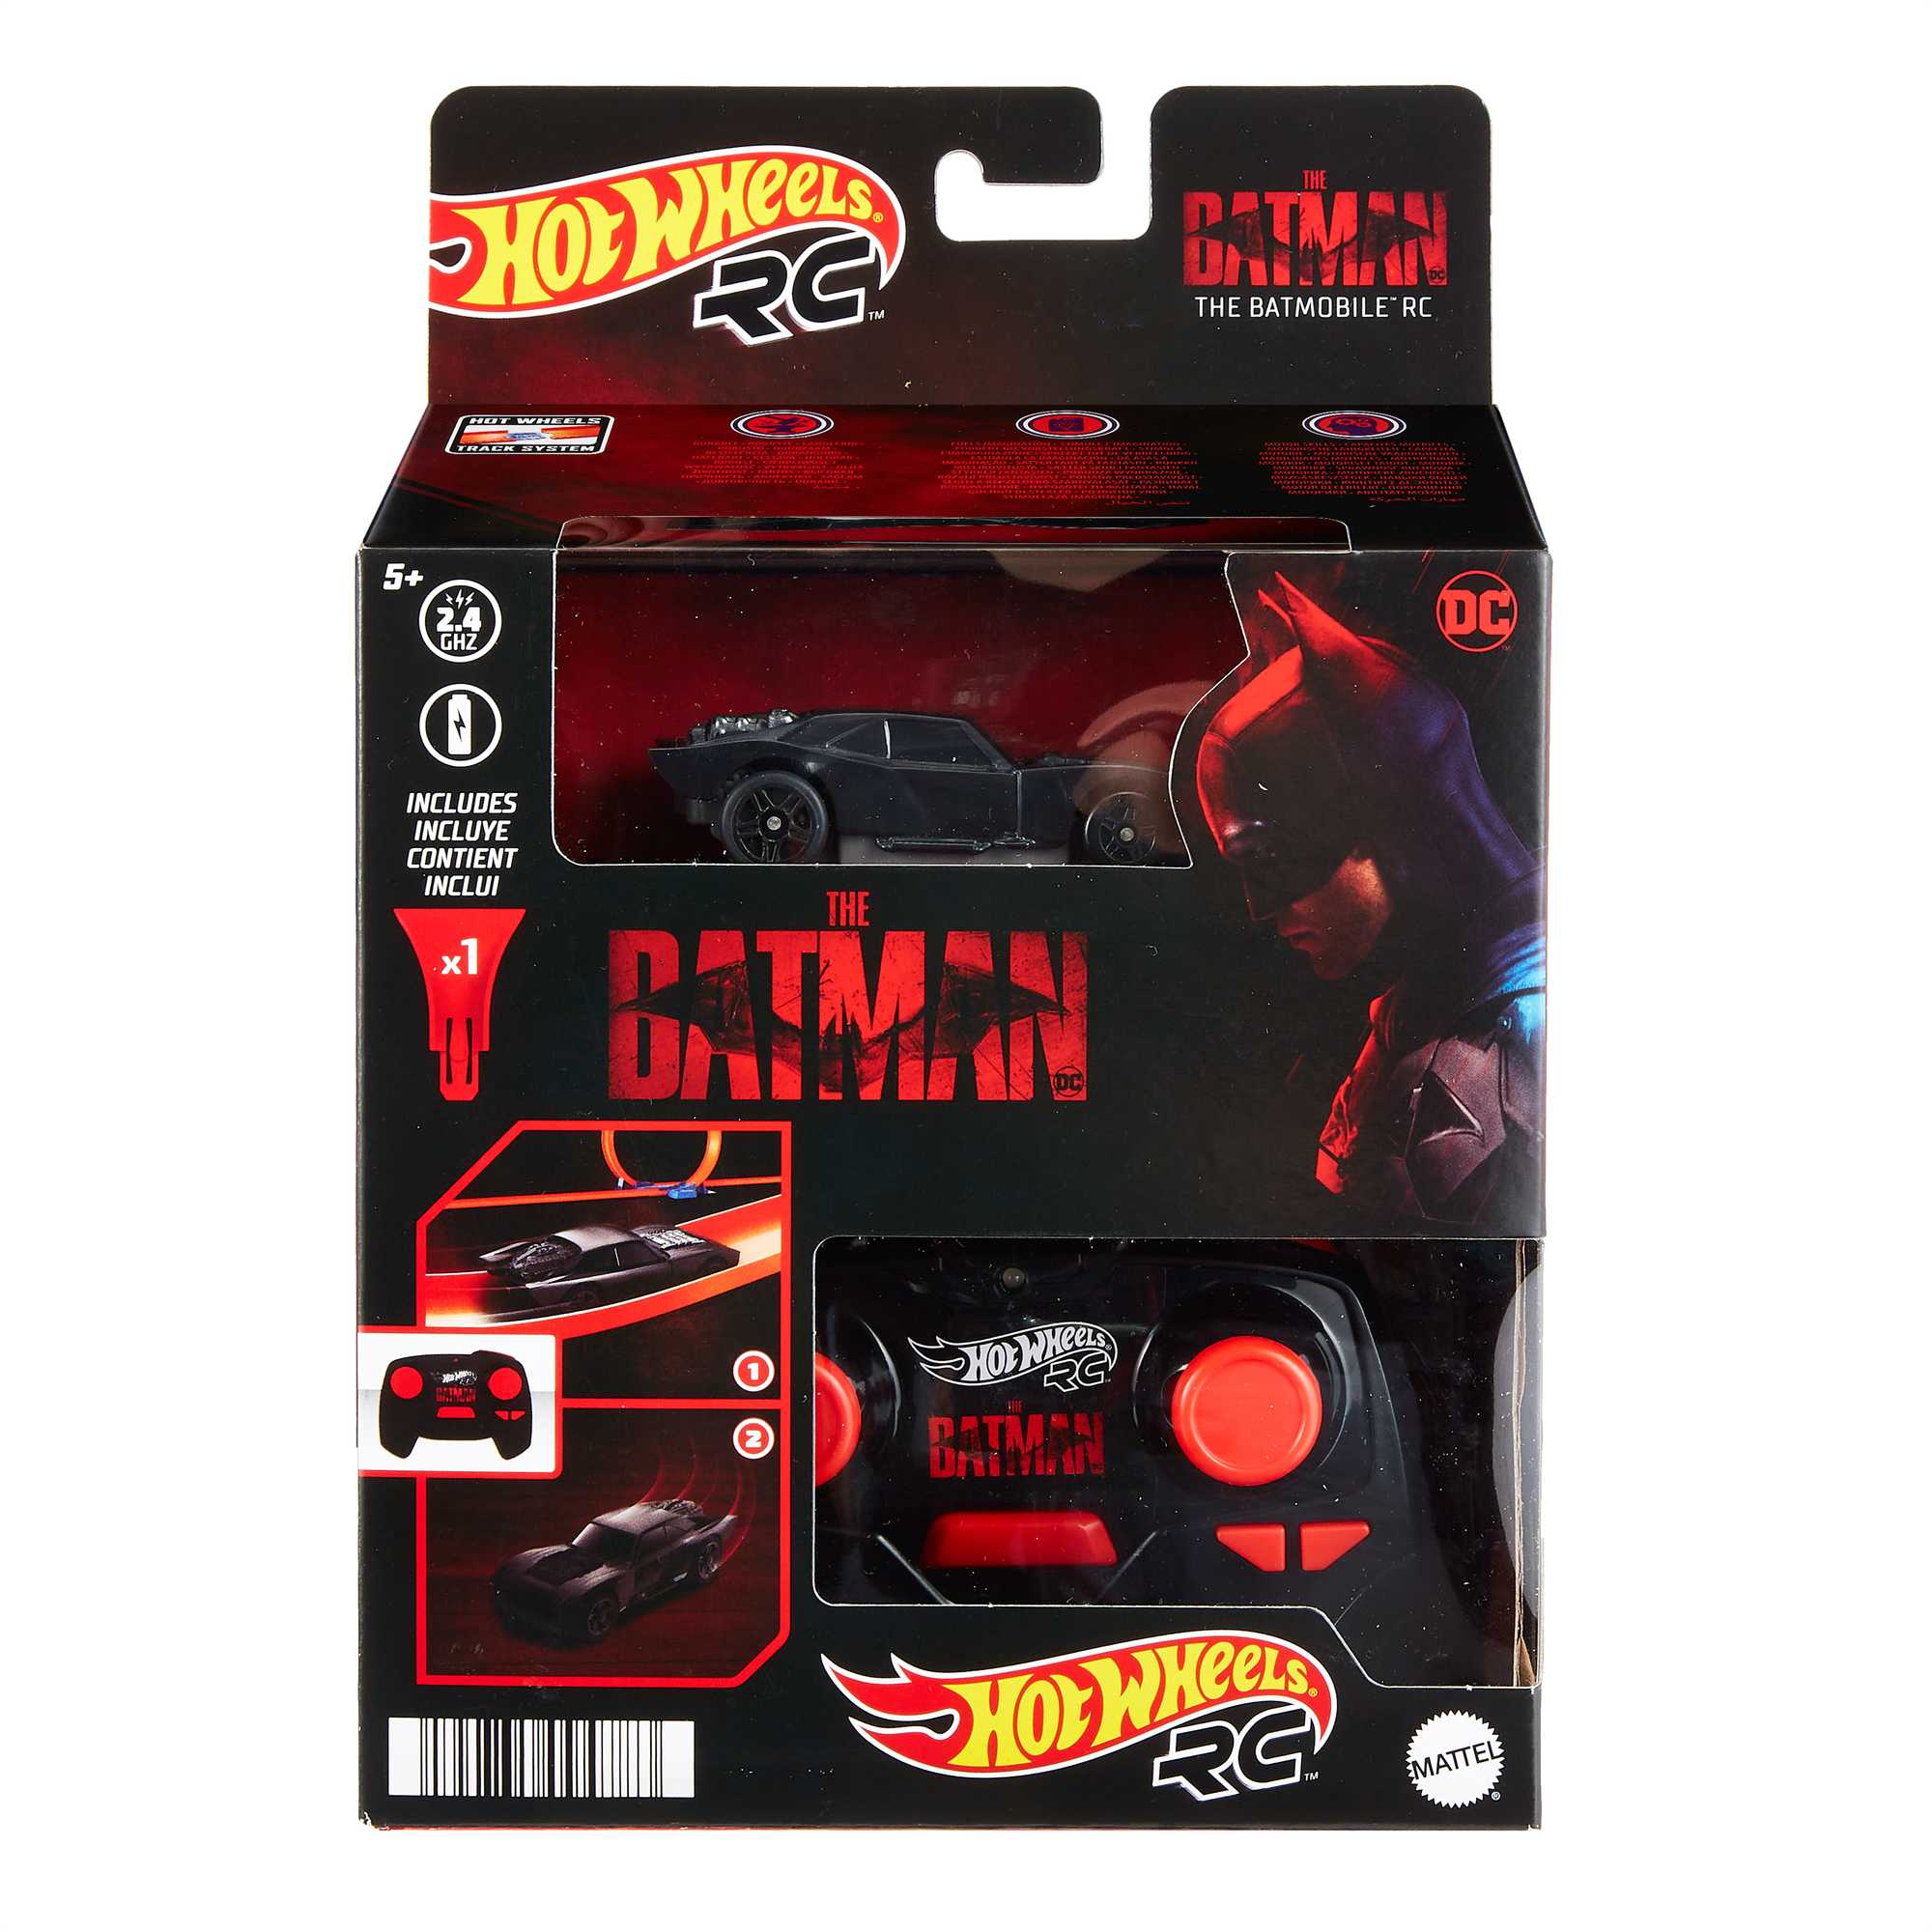  Hot Wheels Batman Character Cars 6-Pack, Set of 6 Toy Cars in  1:64 Scale Inspired by Various Batman Characters : Toys & Games